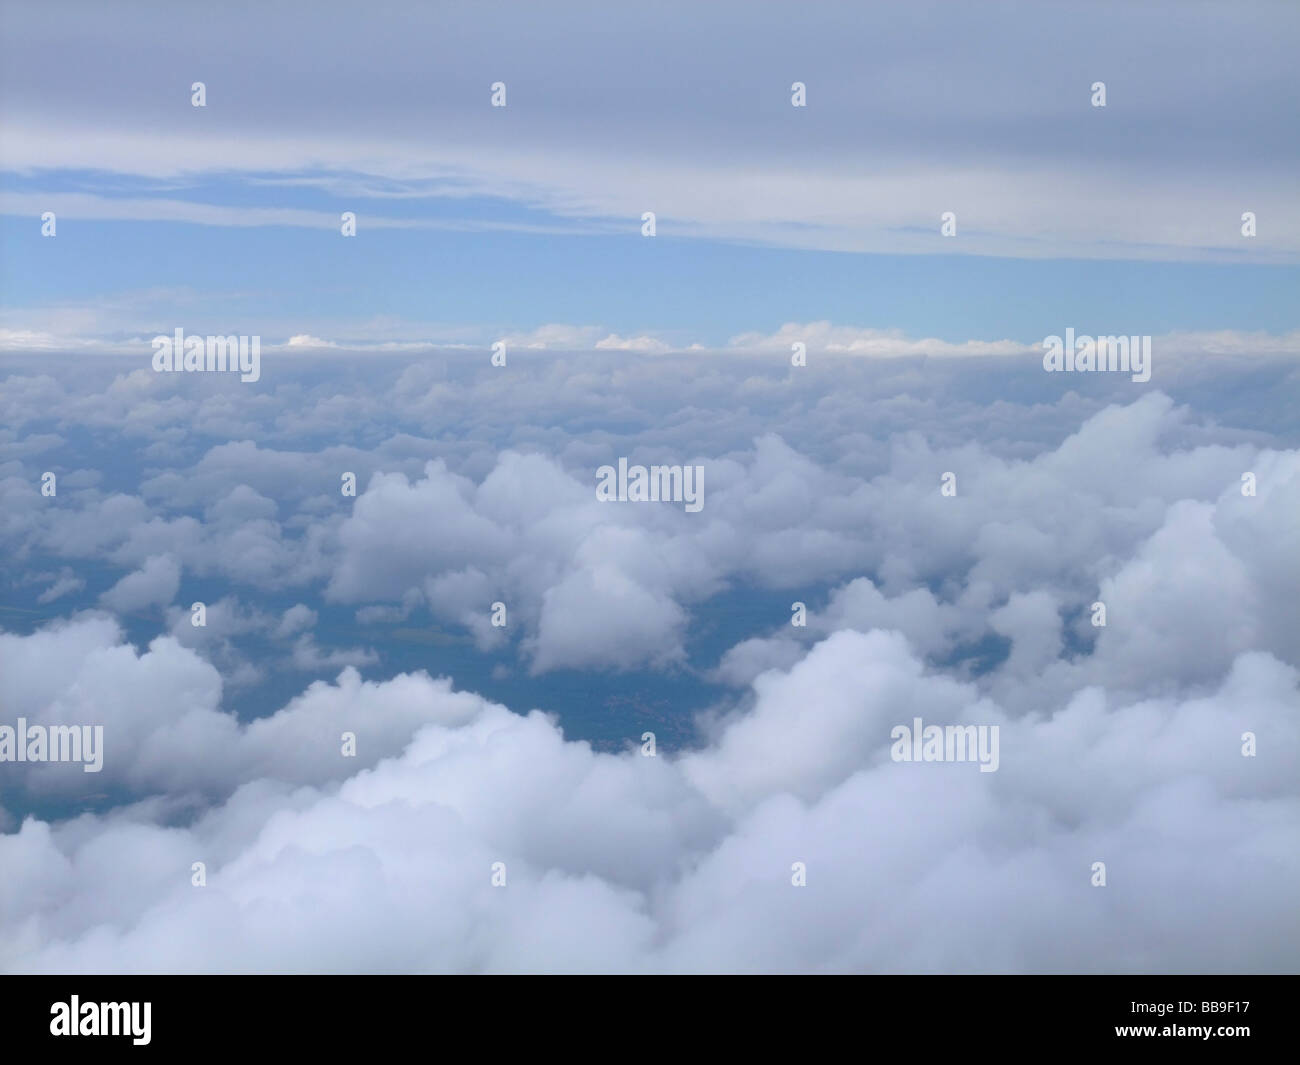 Aerial view of two layers of clouds : down, some altocumulus (Ac) clouds and up, some stratocumulus clouds (Sc) Stock Photo